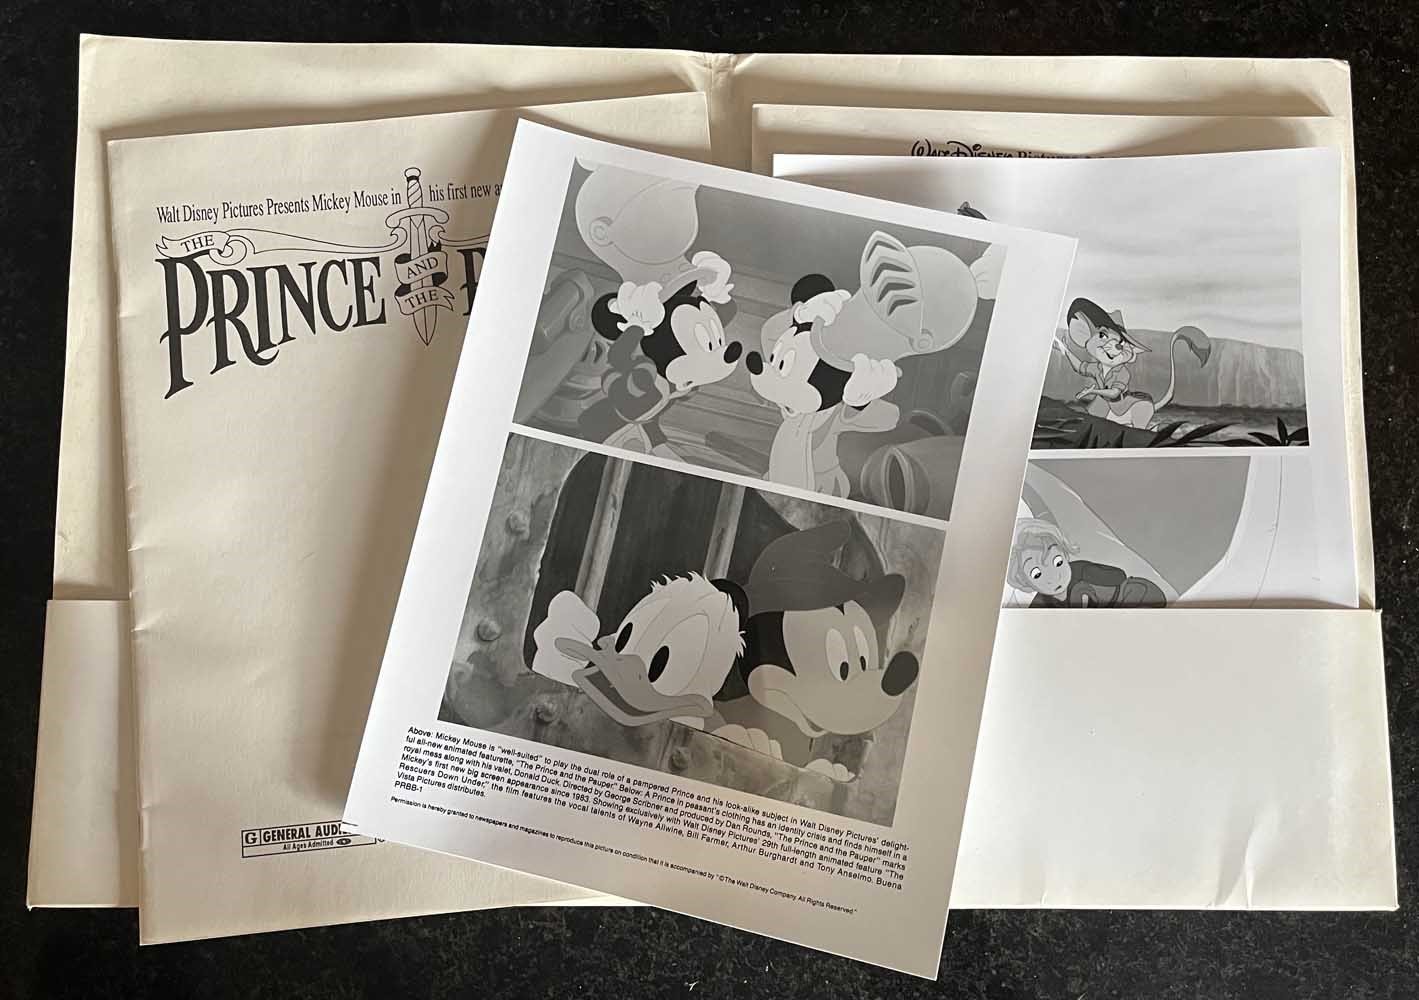 Disney RESCUERS DOWN UNDER & PRINCE AND THE PAUPER press kit 1990